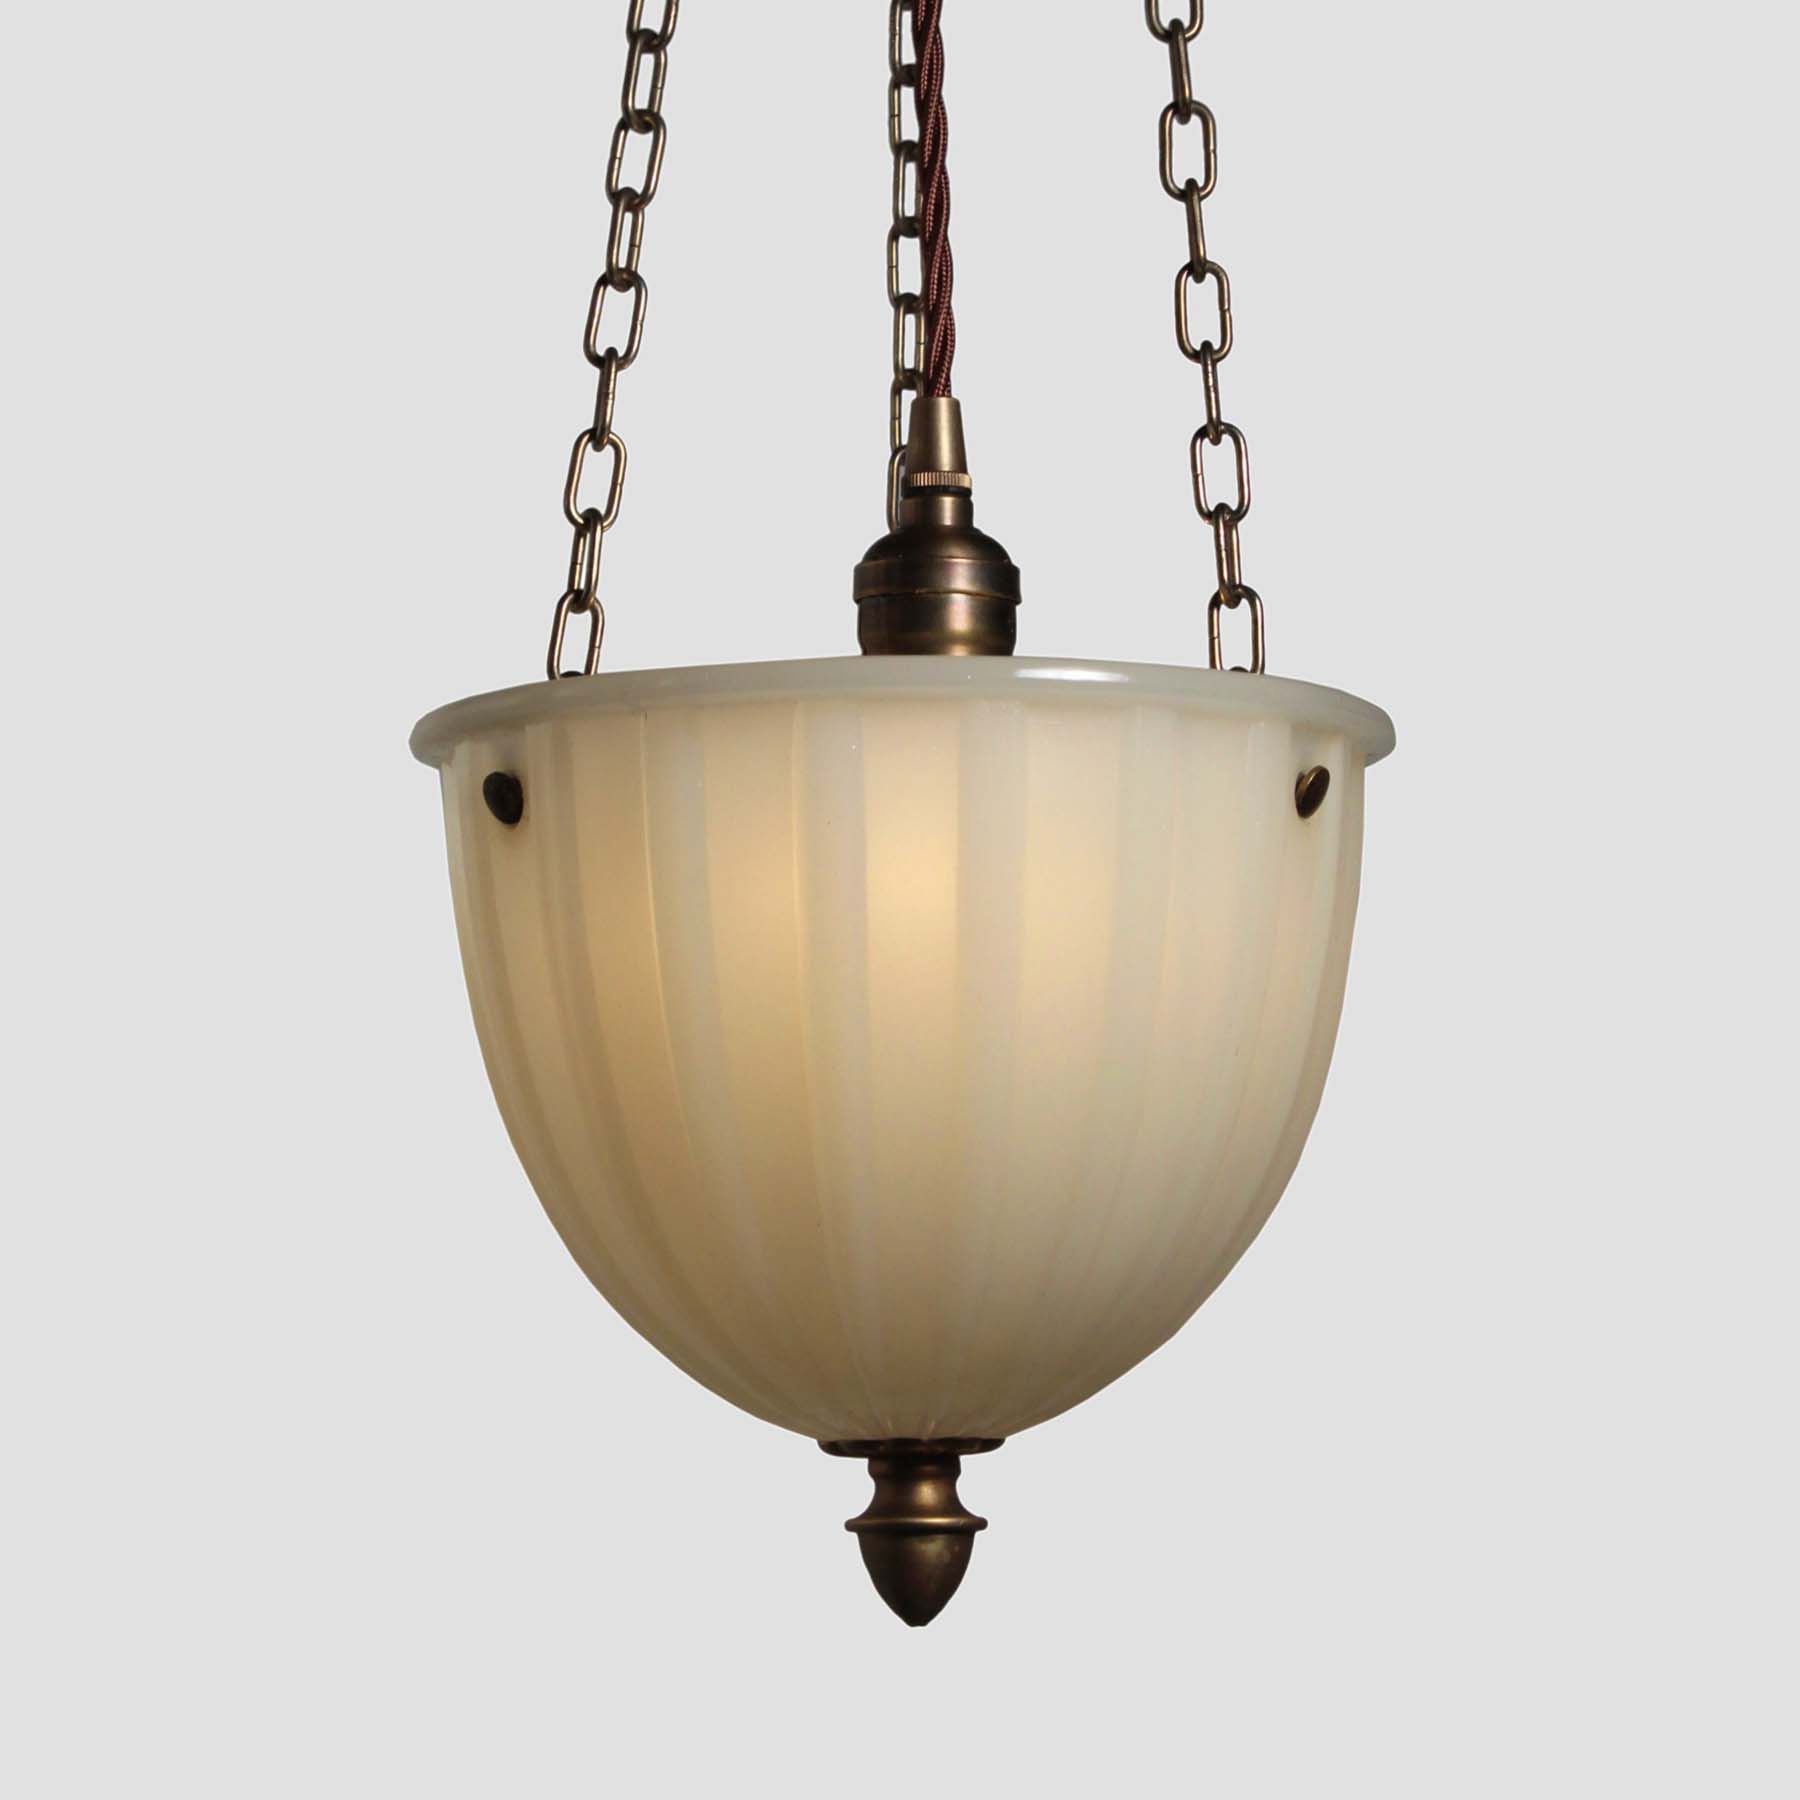 SOLD Inverted Dome Pendant Light, Antique Lighting-69110